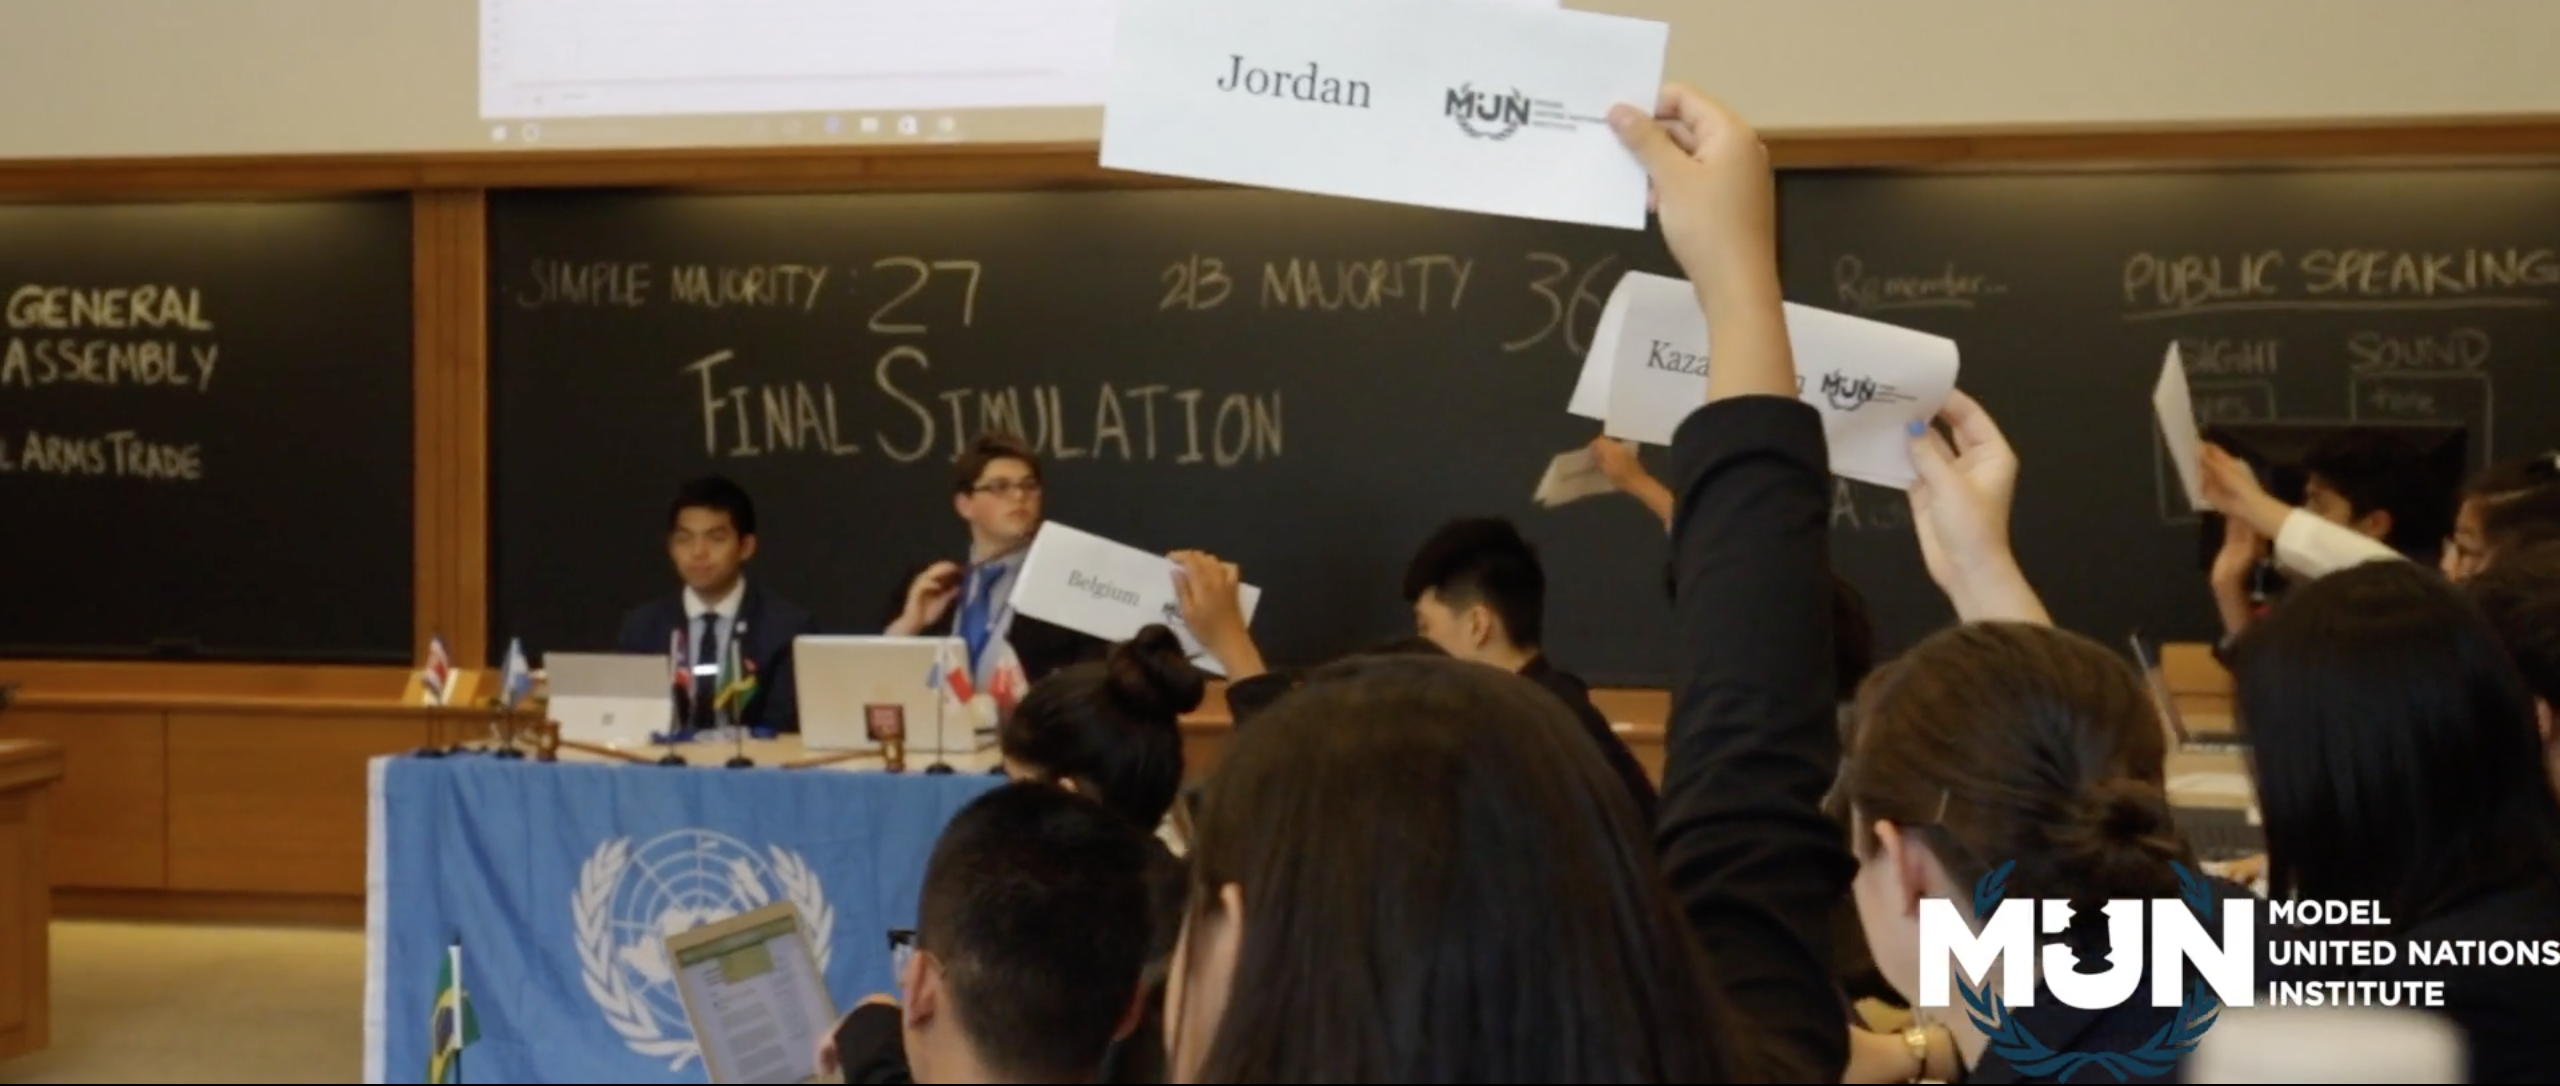 Students during final simulation